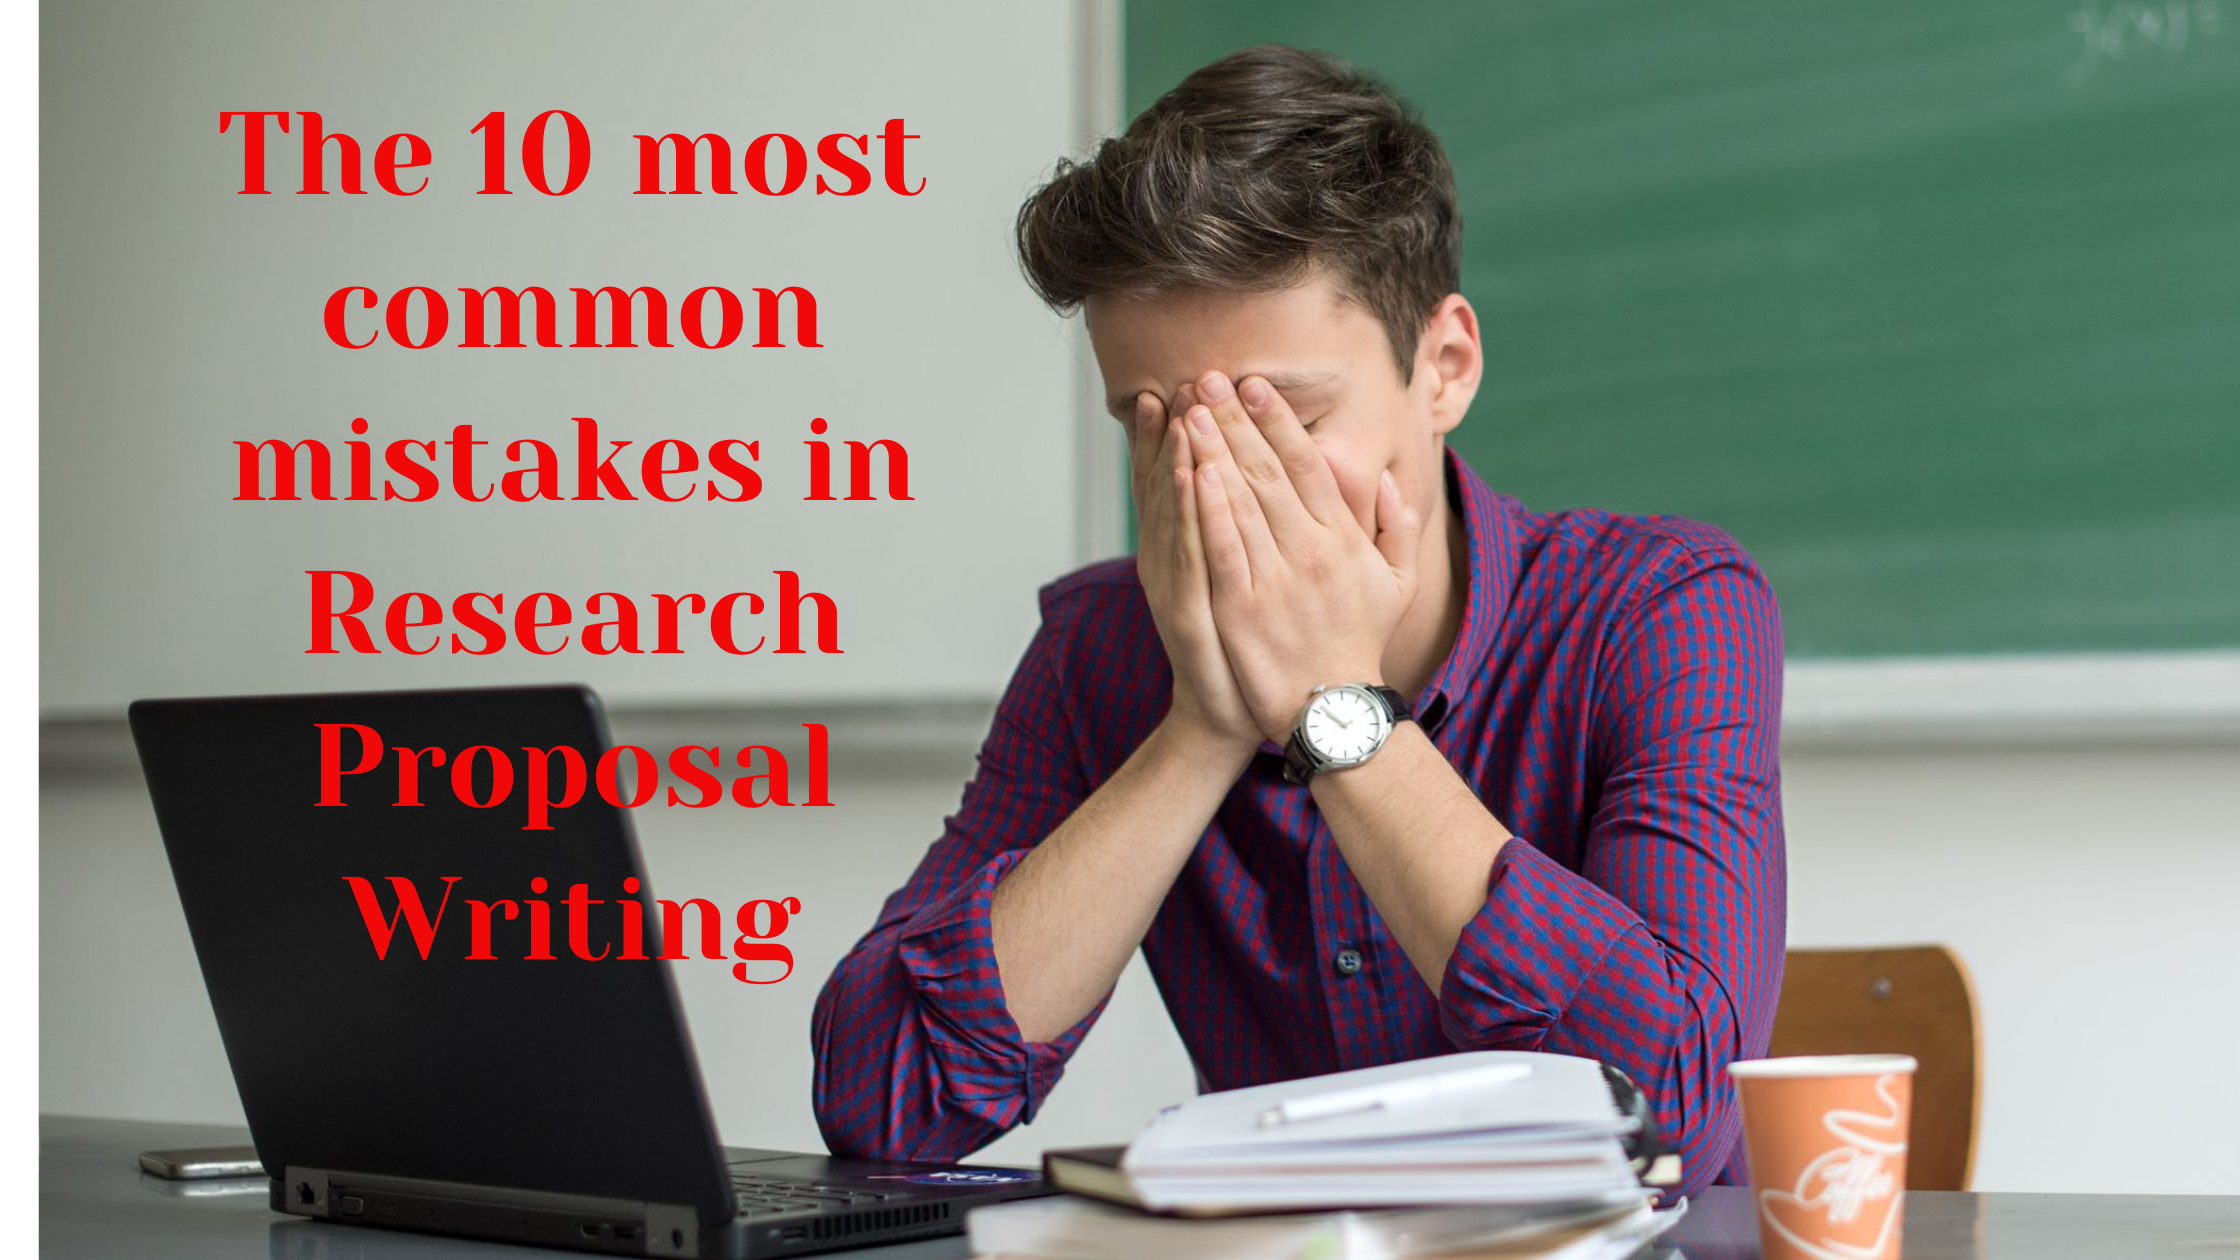 The 10 most common mistakes in Research Proposal Writing